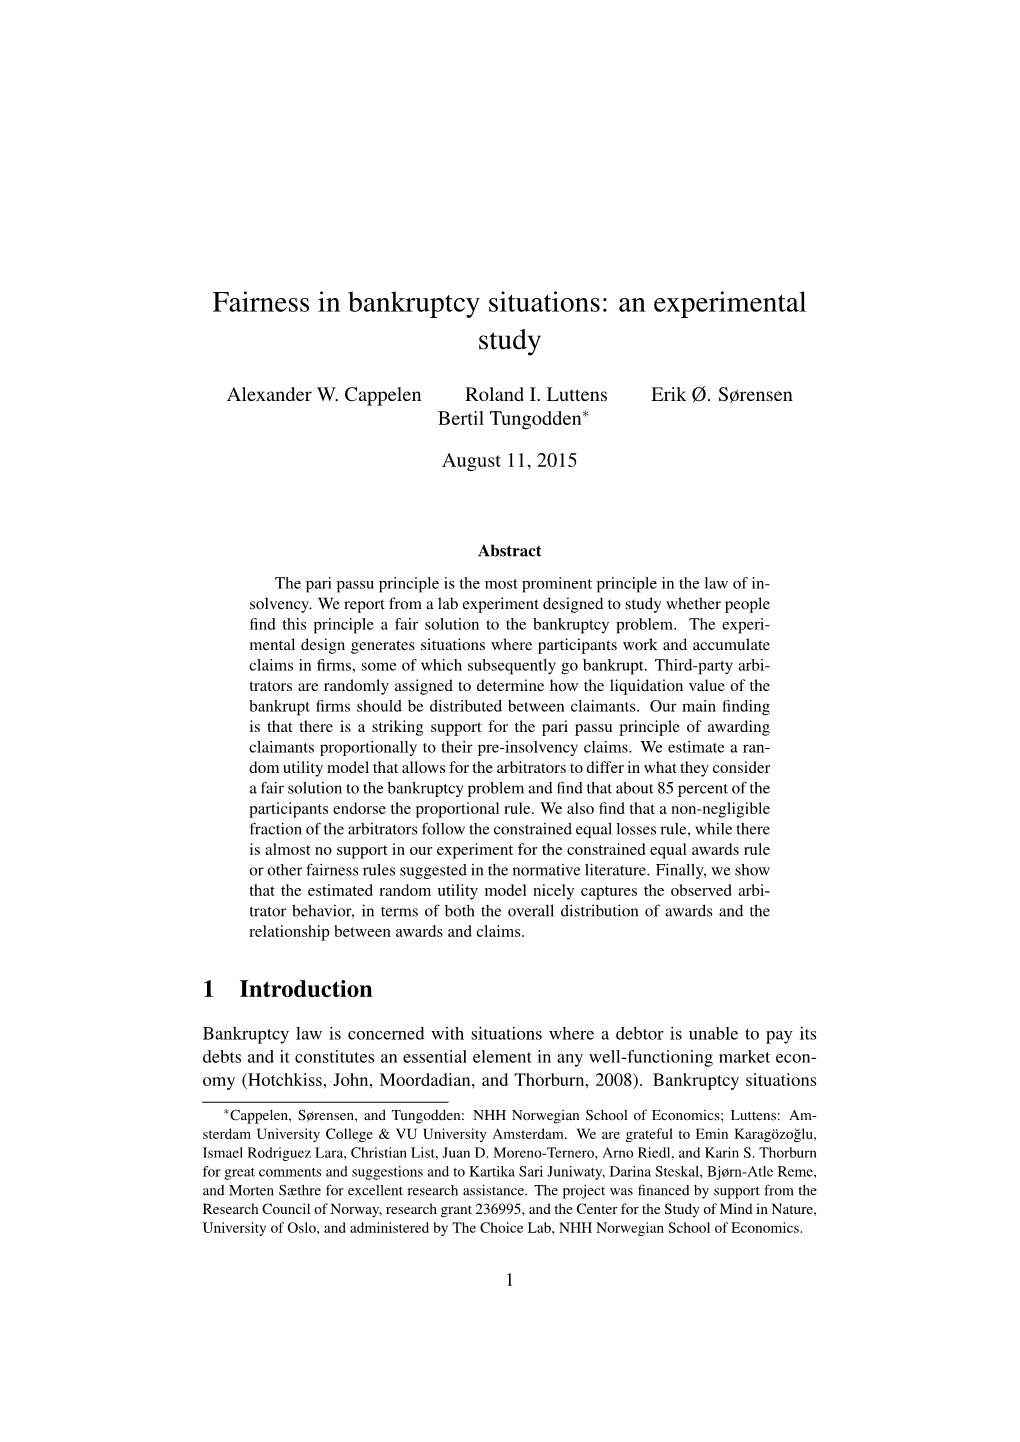 Fairness in Bankruptcy Situations: an Experimental Study